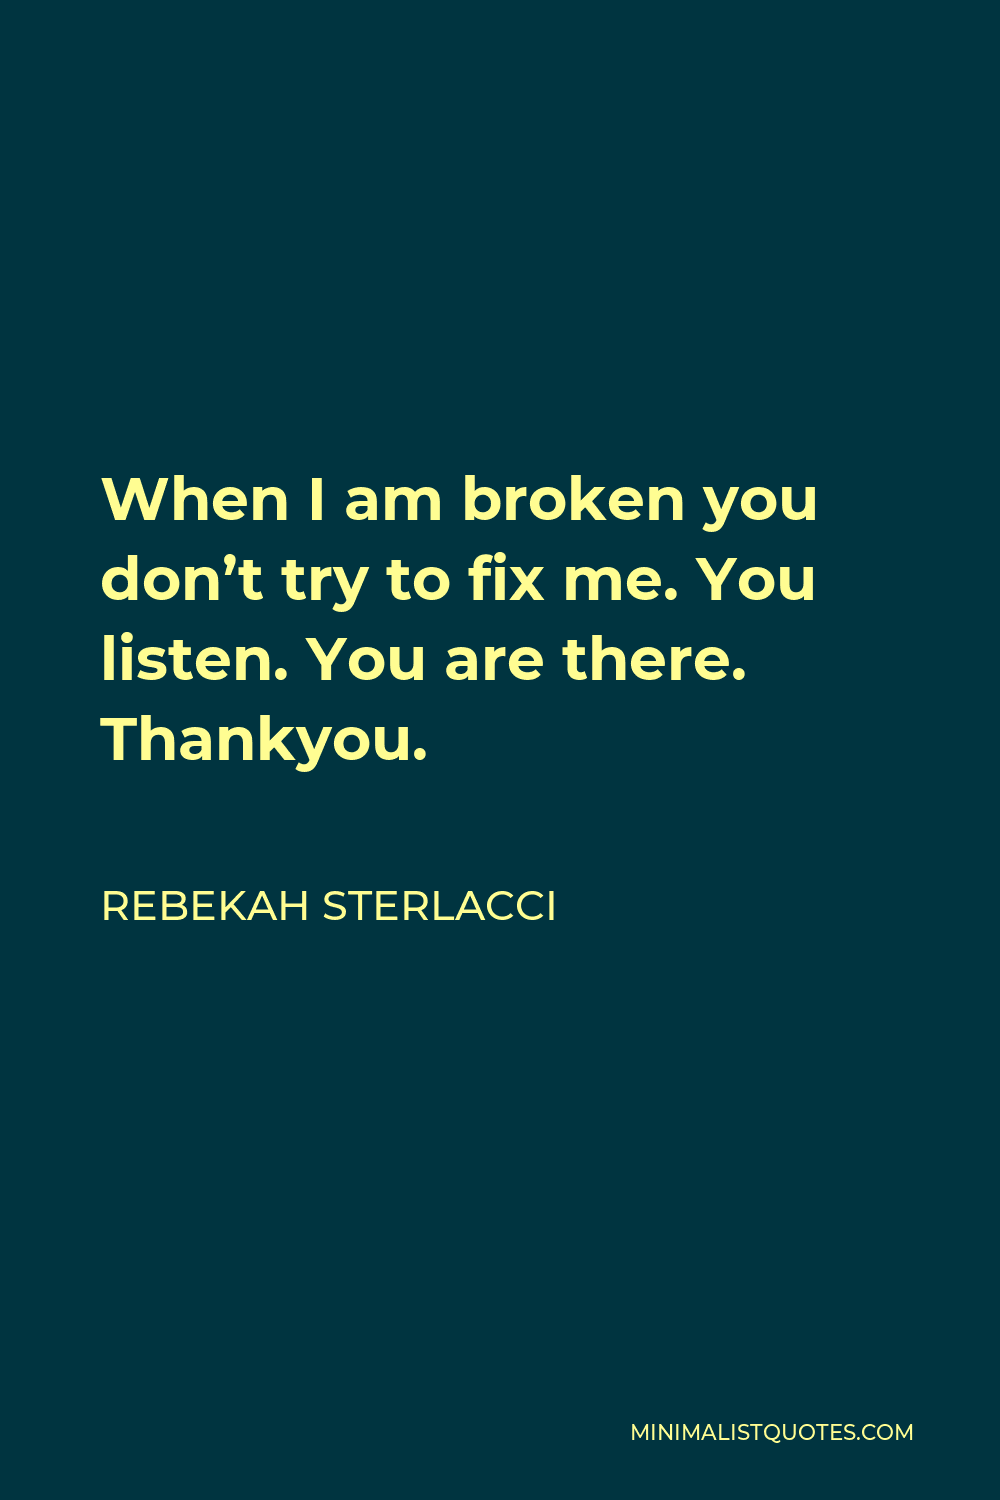 Rebekah Sterlacci Quote: When I am broken you don't try to fix me ...